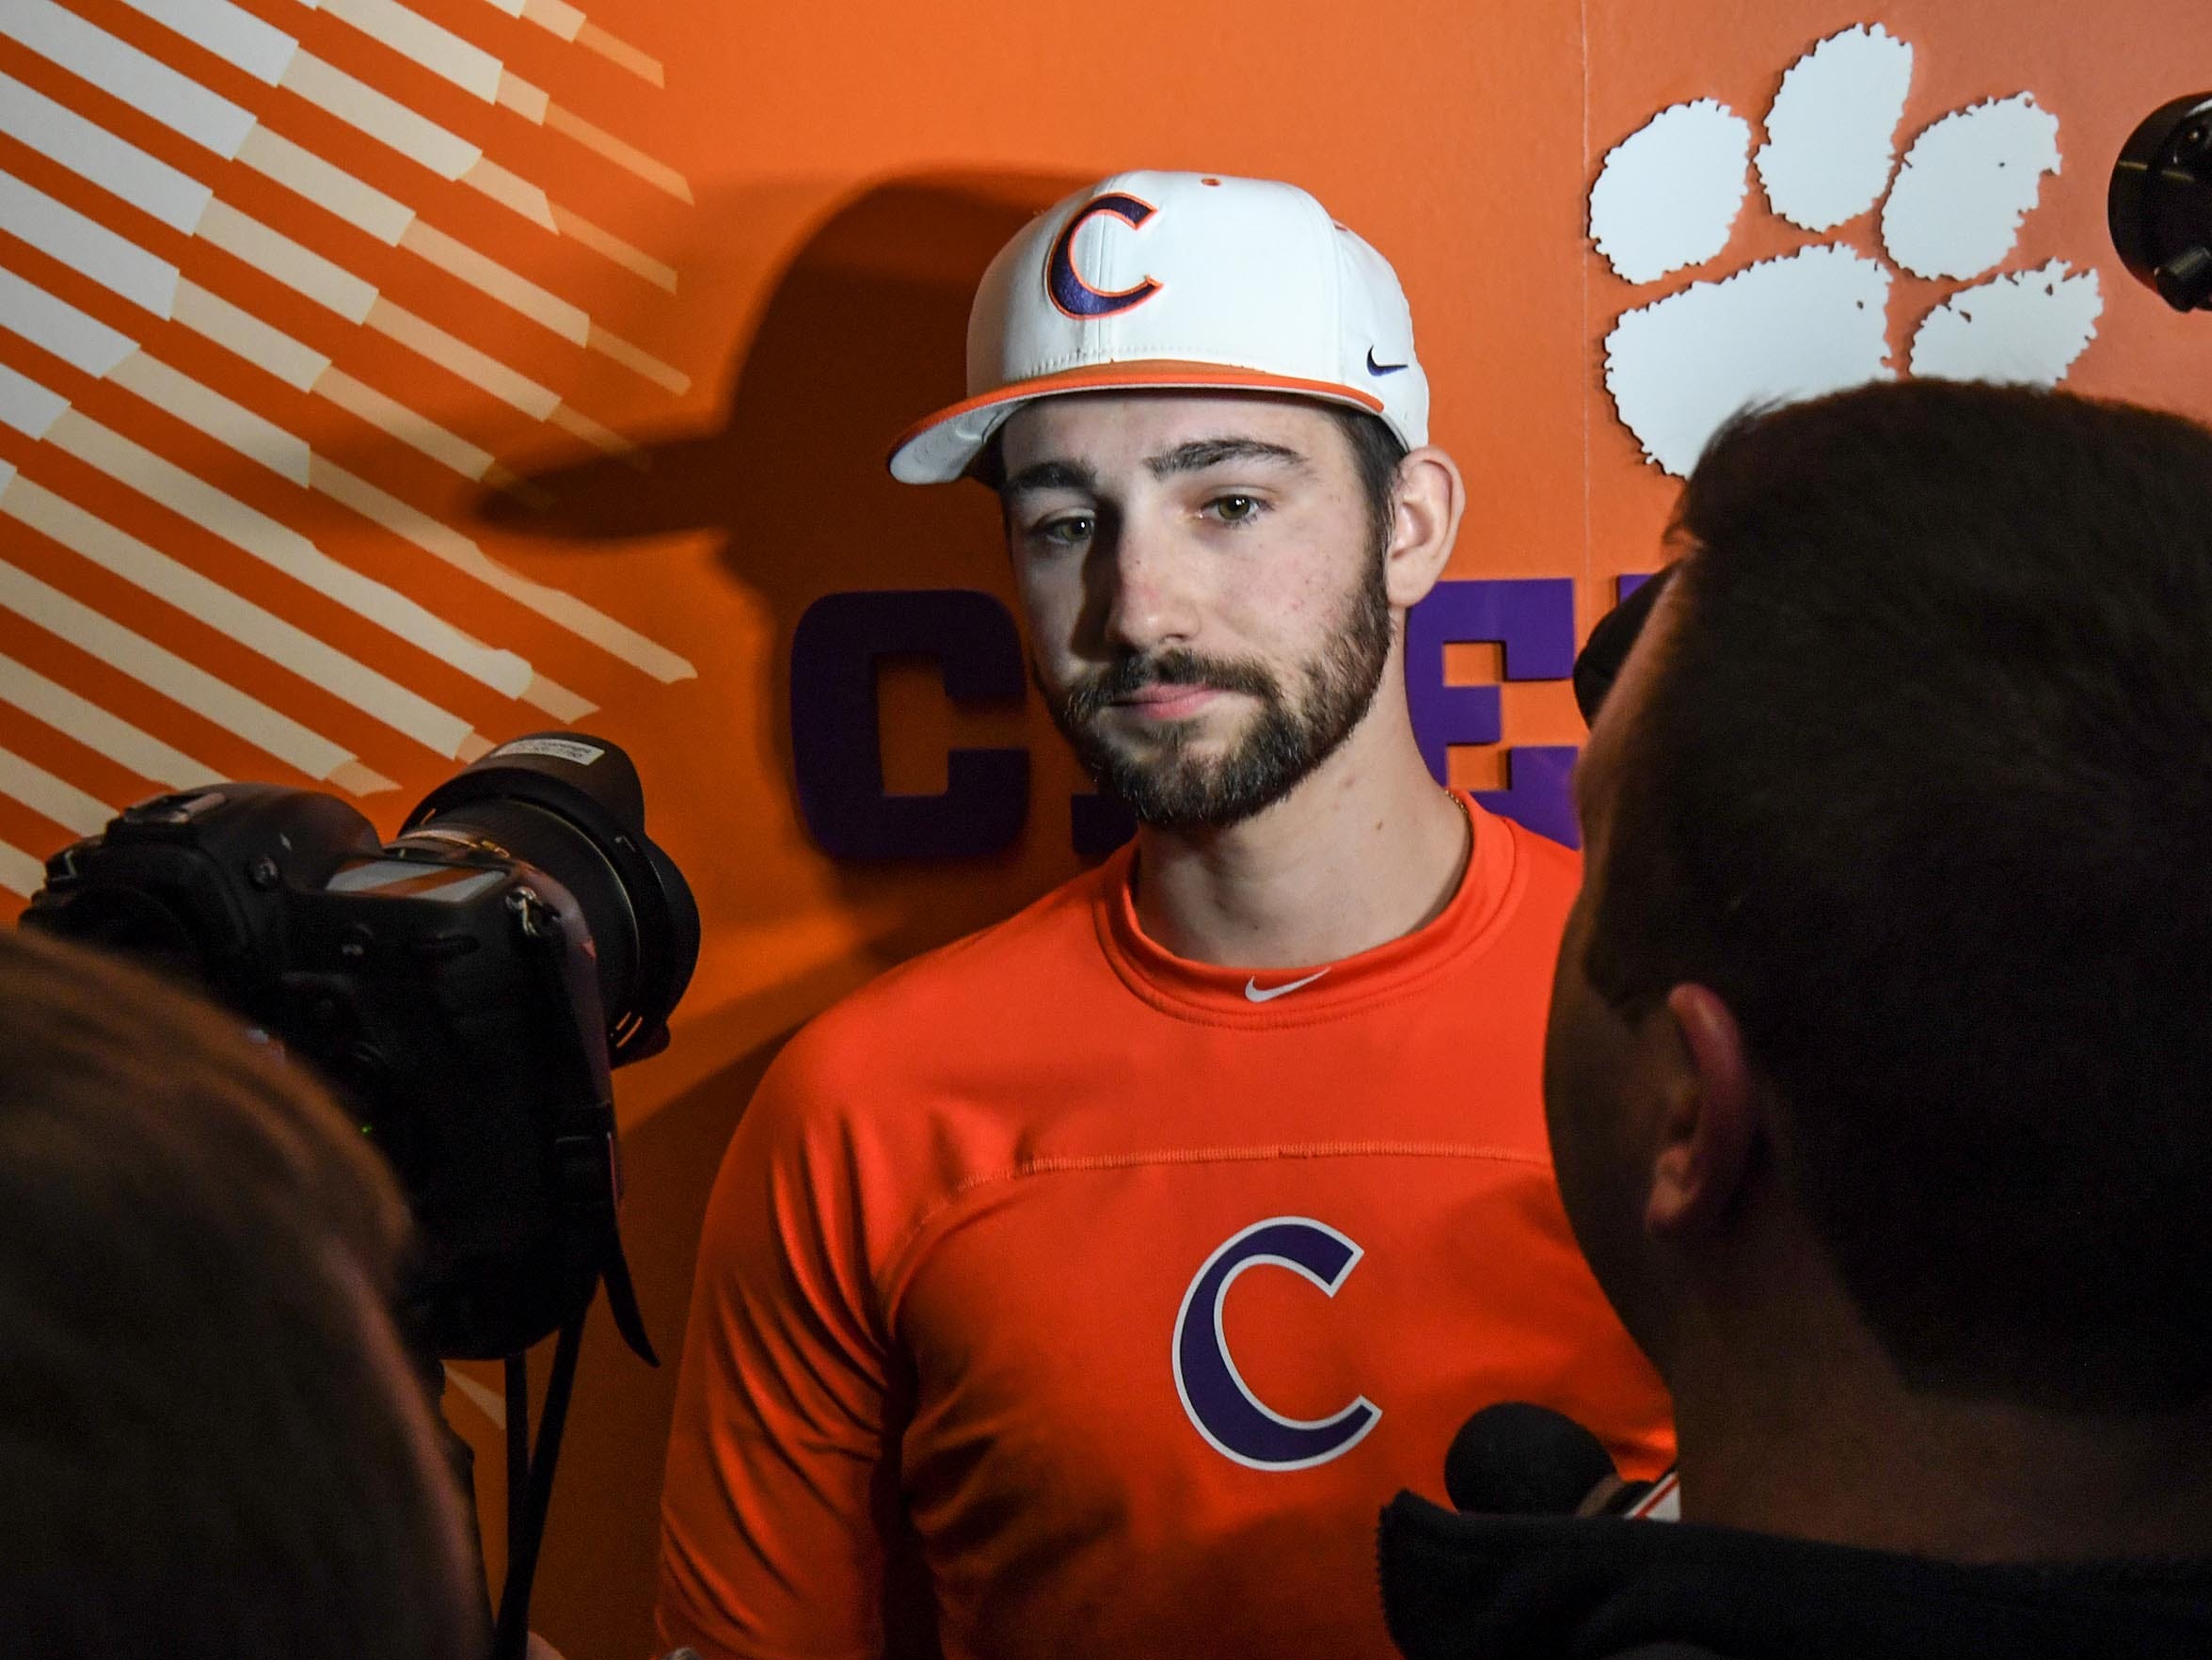 Clemson sophomore Spencer Strider(29) talks with media before their first official team Spring practice at Doug Kingsmore Stadium in Clemson Friday, January 24, 2020.